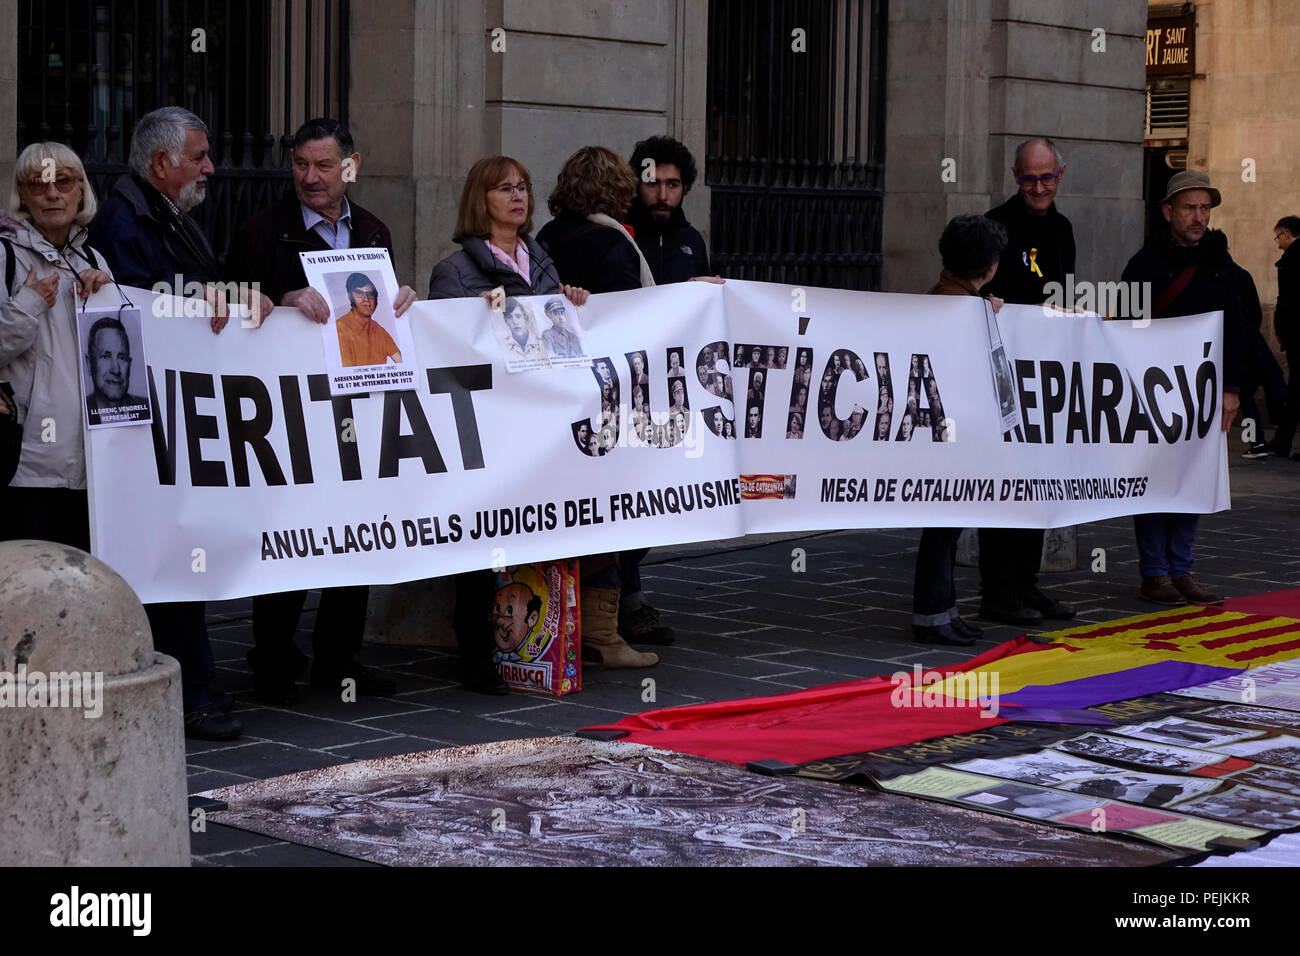 Truth, Justice and Reparation Relatives Protest In Barcelona For The Missing People From The Era Of Fascism In Spains Past Stock Photo